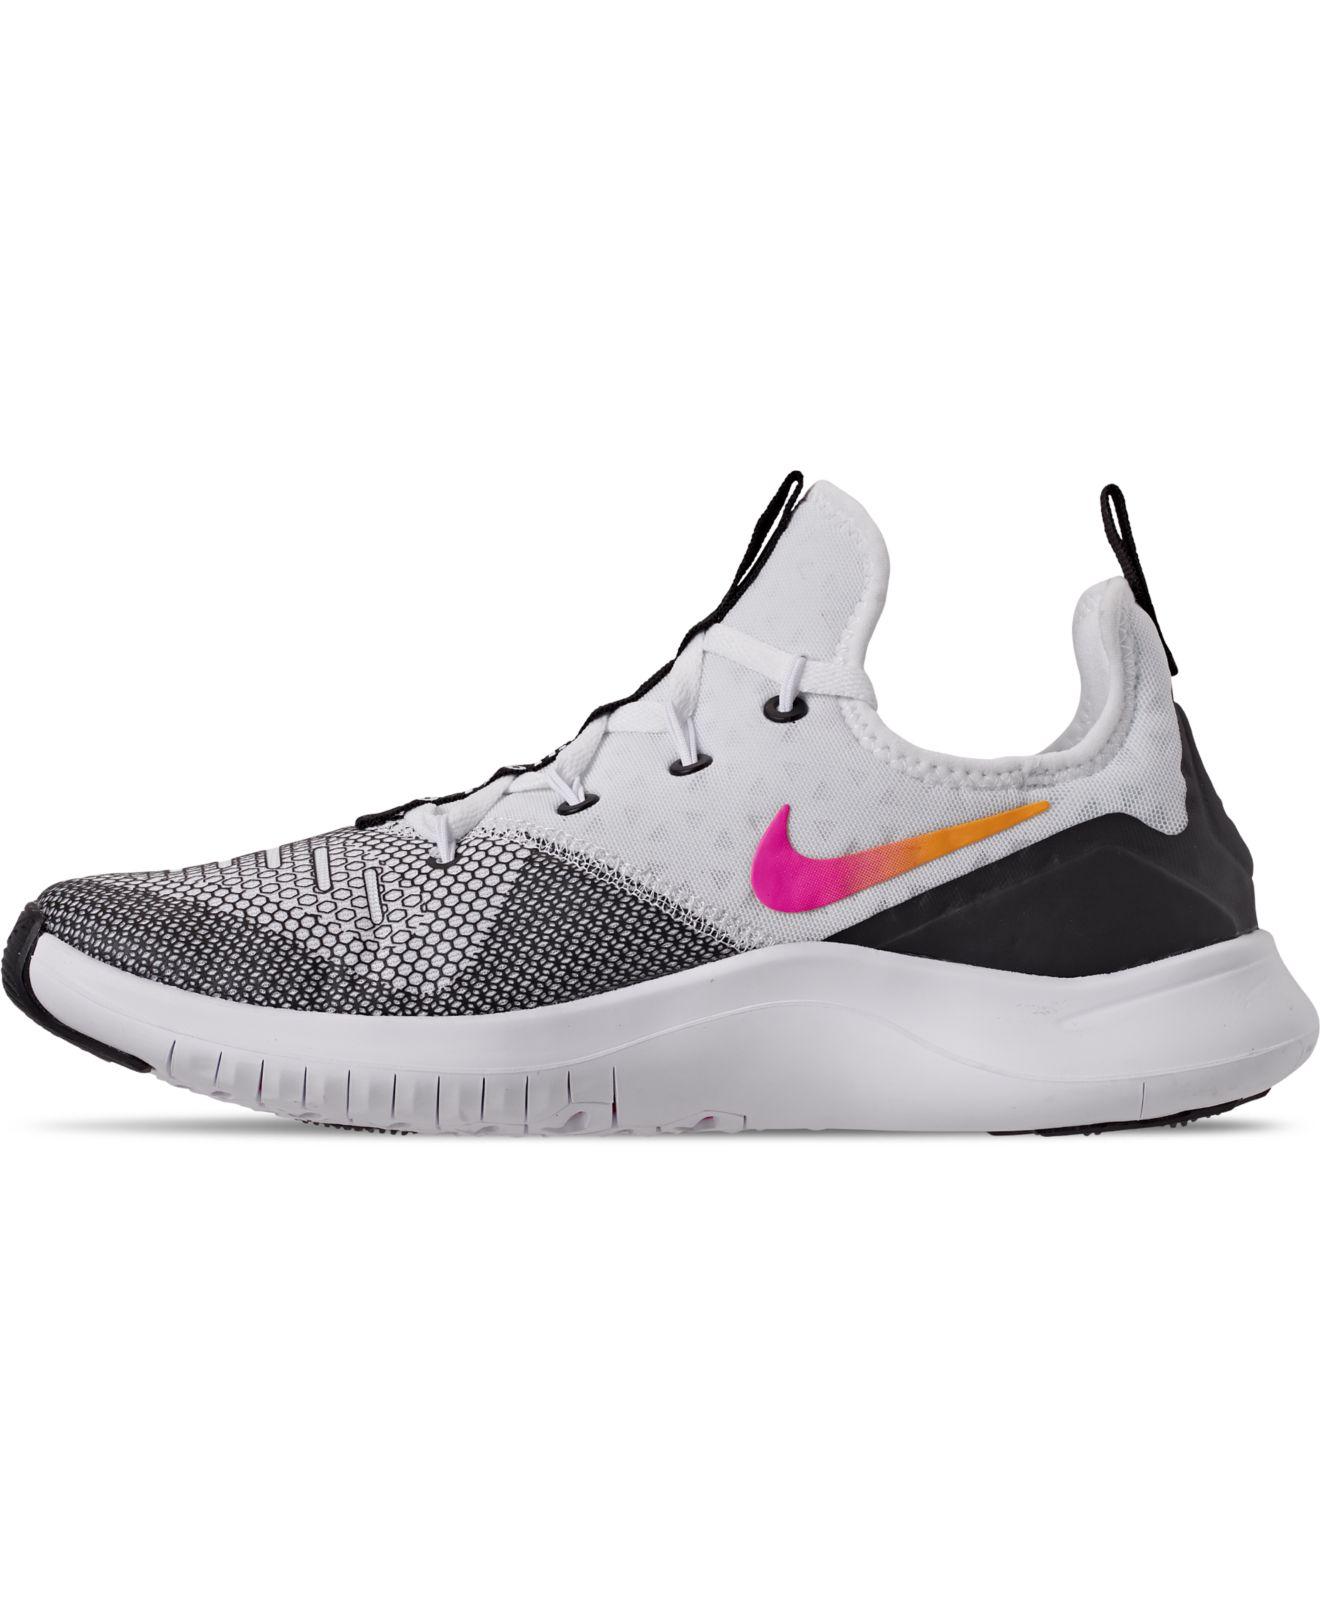 Nike Rubber Free Tr8 Gym/hiit/cross Training Shoe in Black/White (Black) -  Save 45% | Lyst